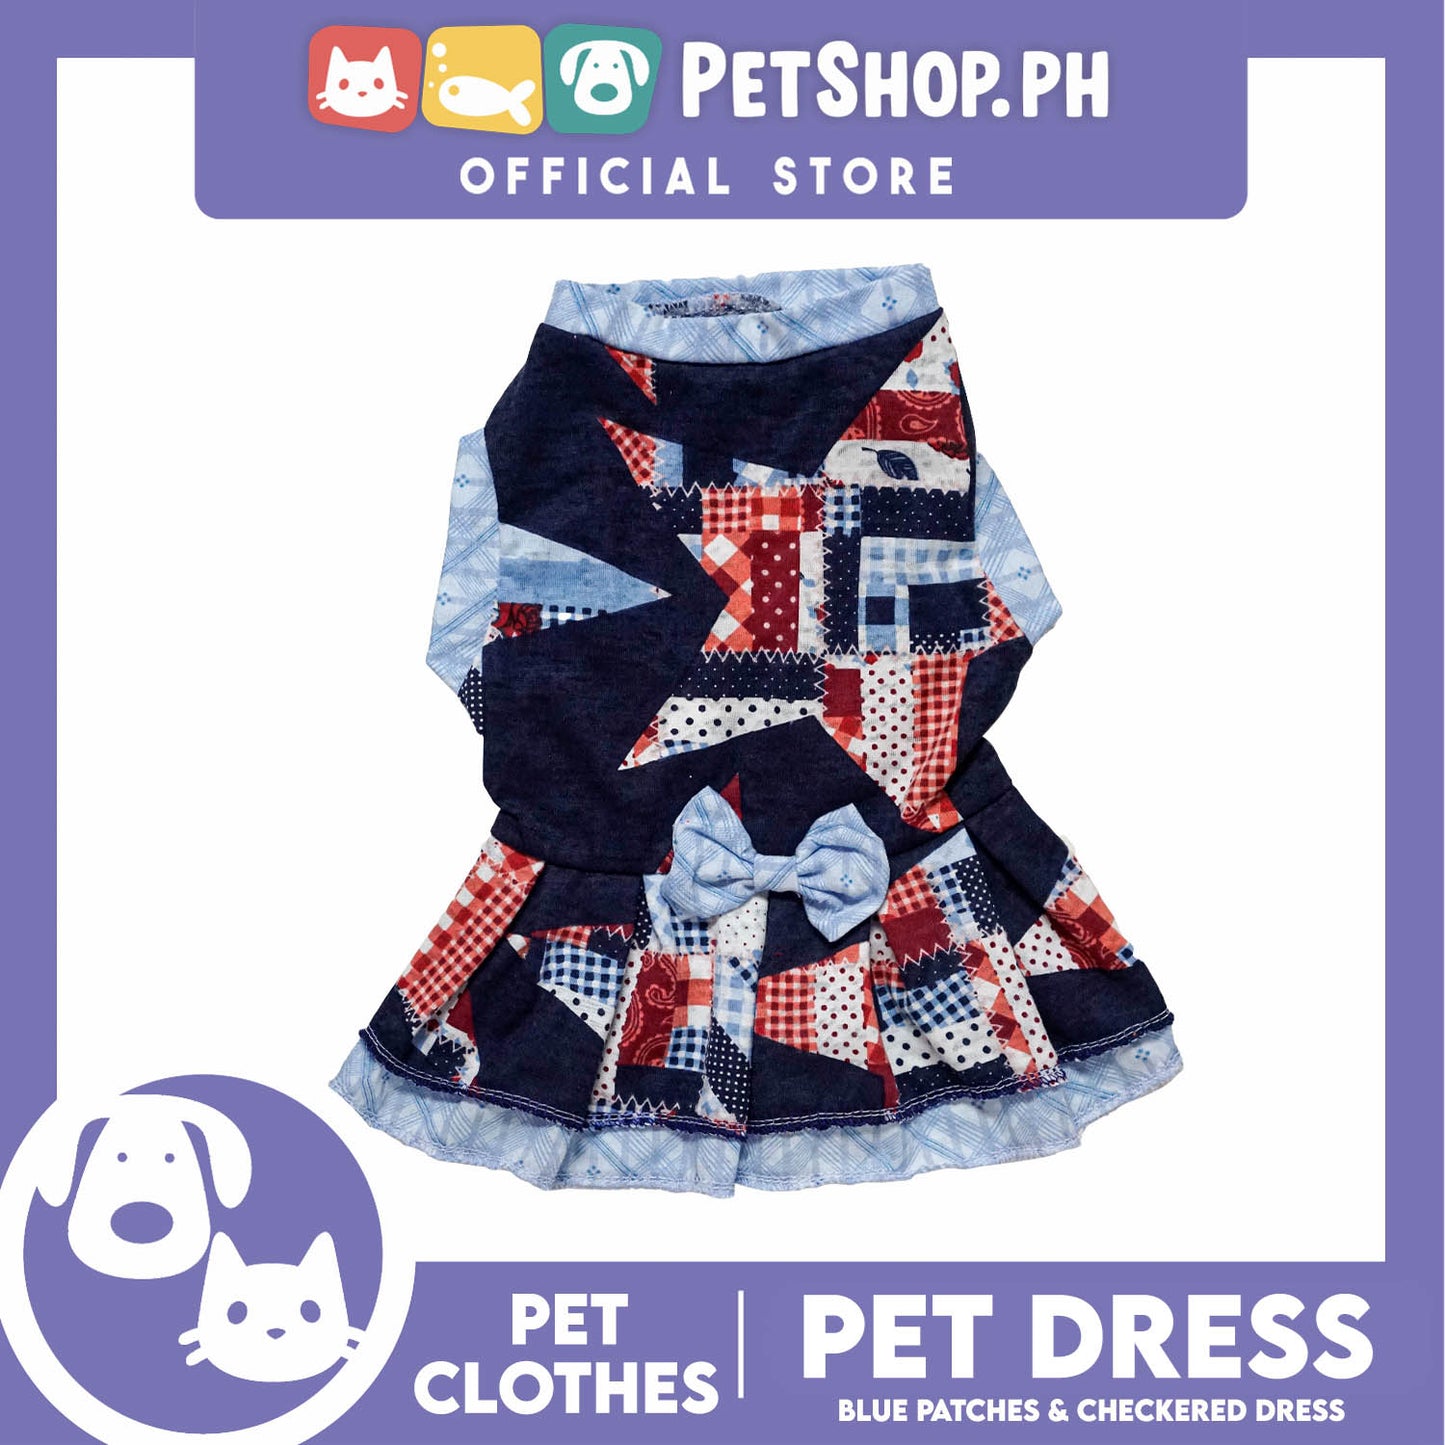 Pet Dress Blue Patches and Checkered Dress (Medium) Perfect Fit for Dogs and Cats